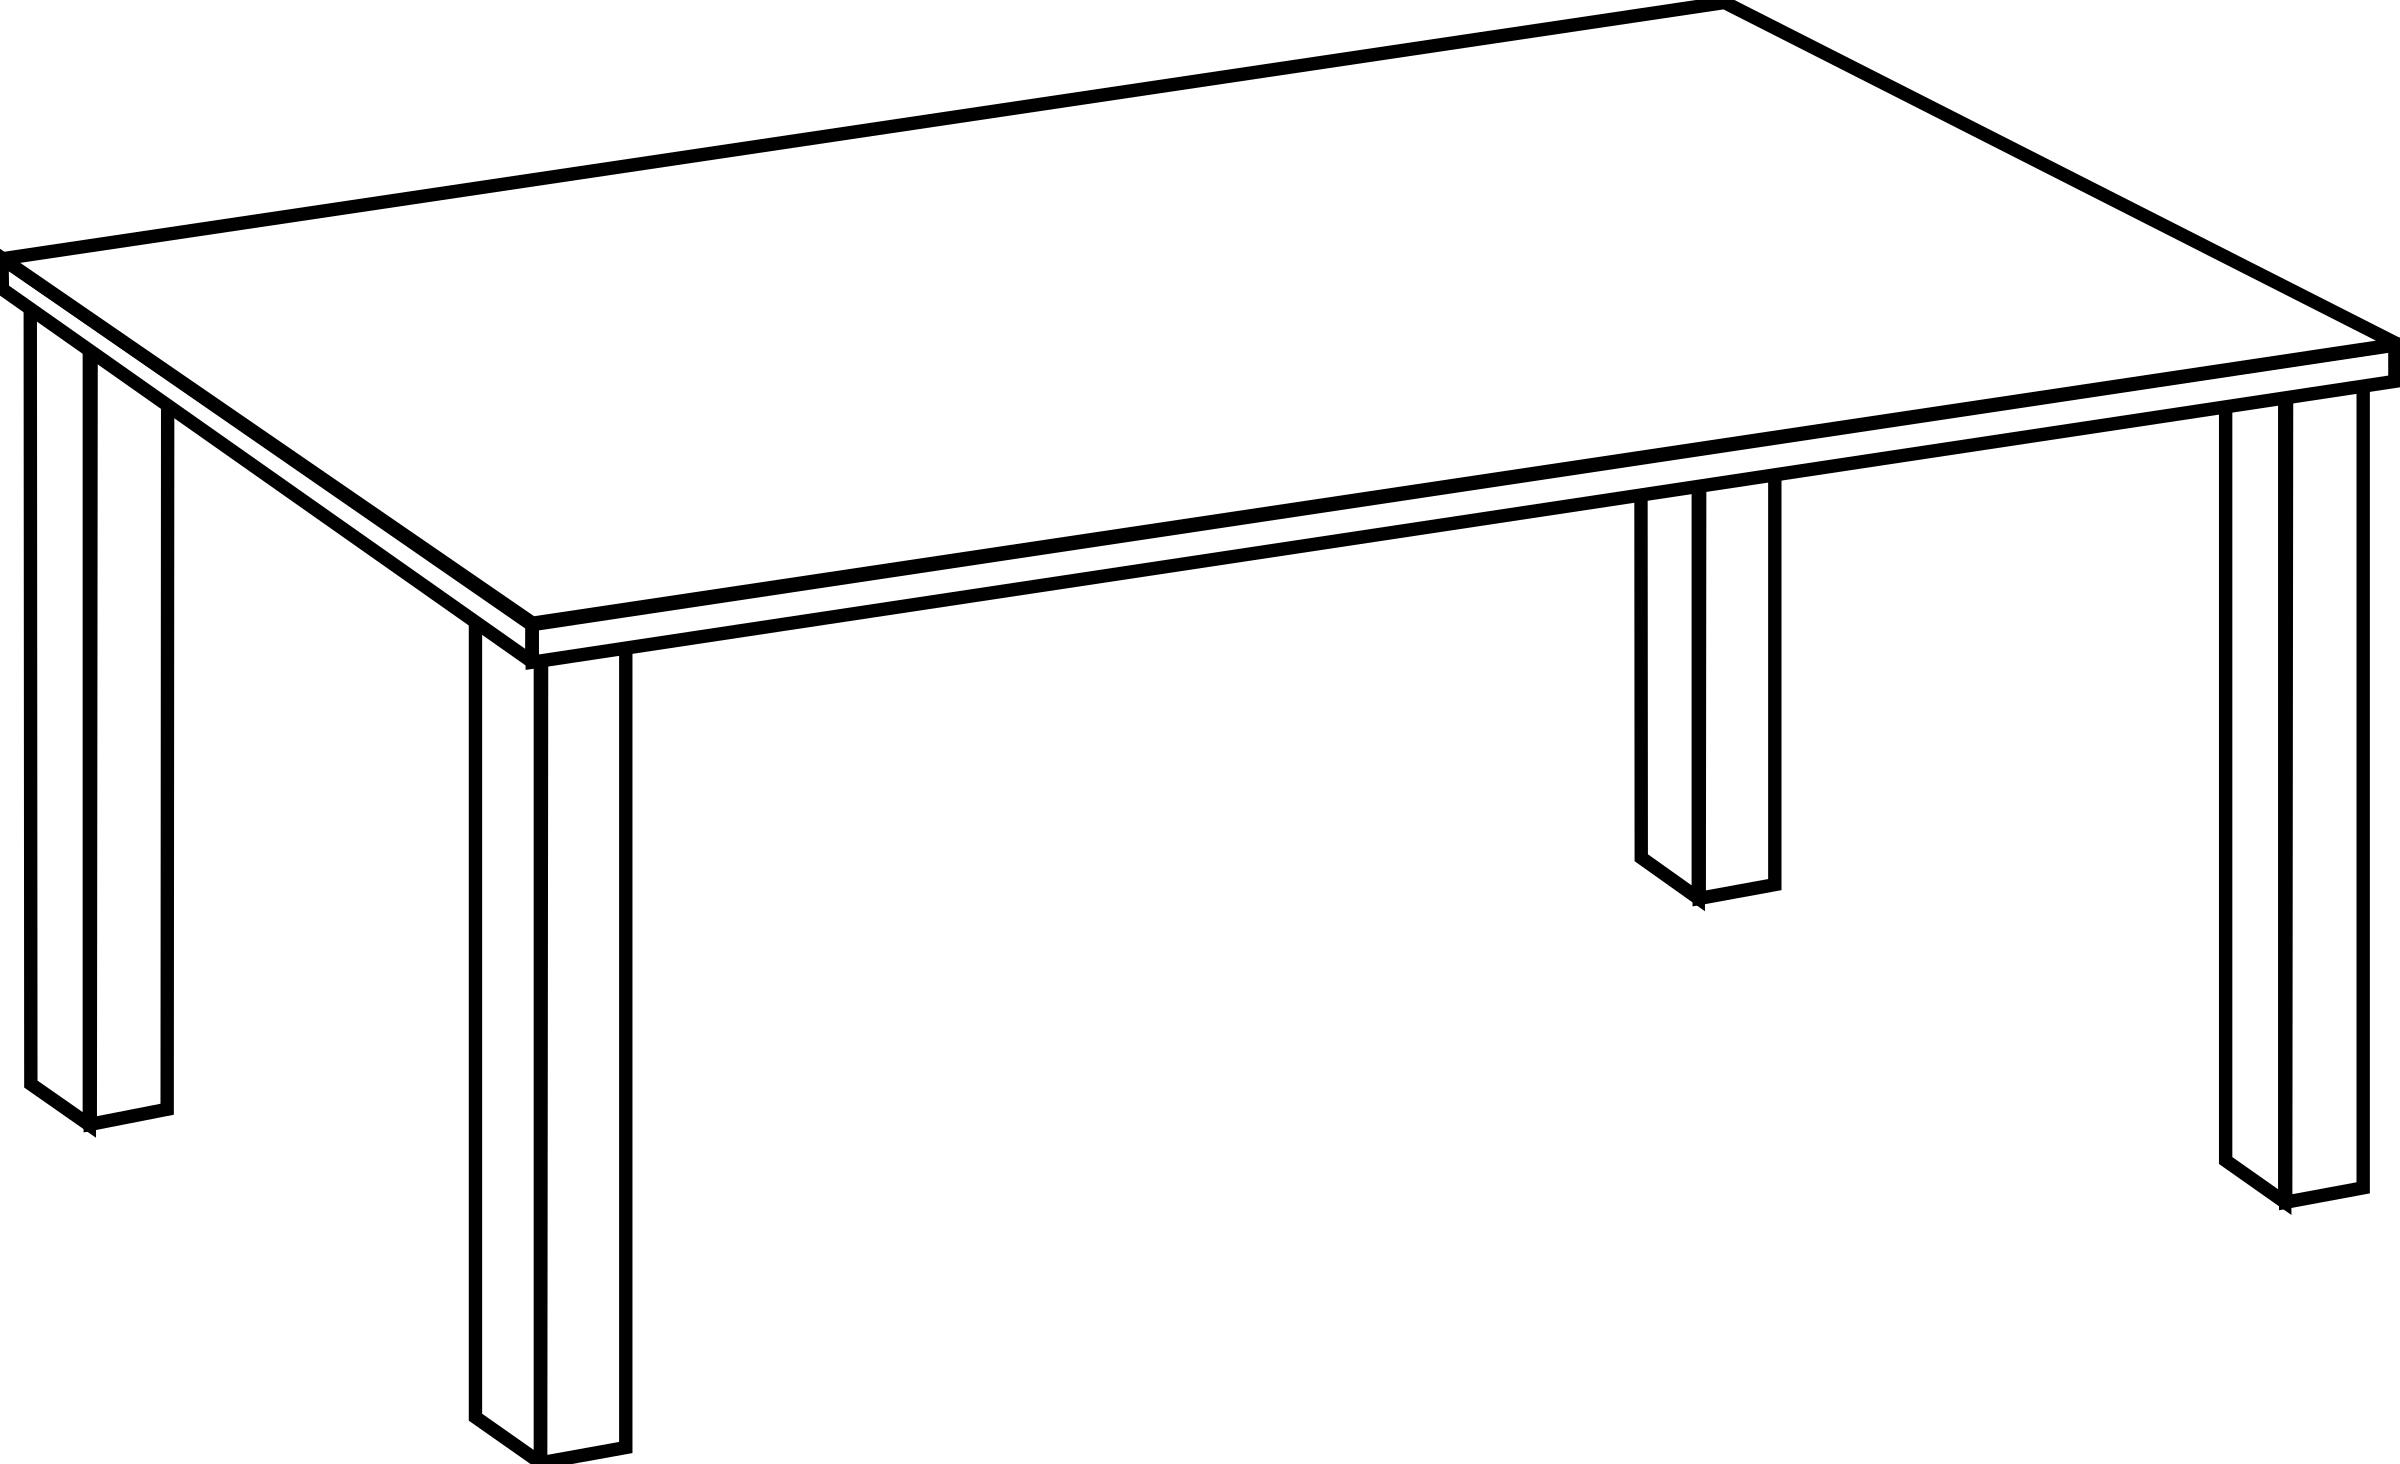 Table Line Art png